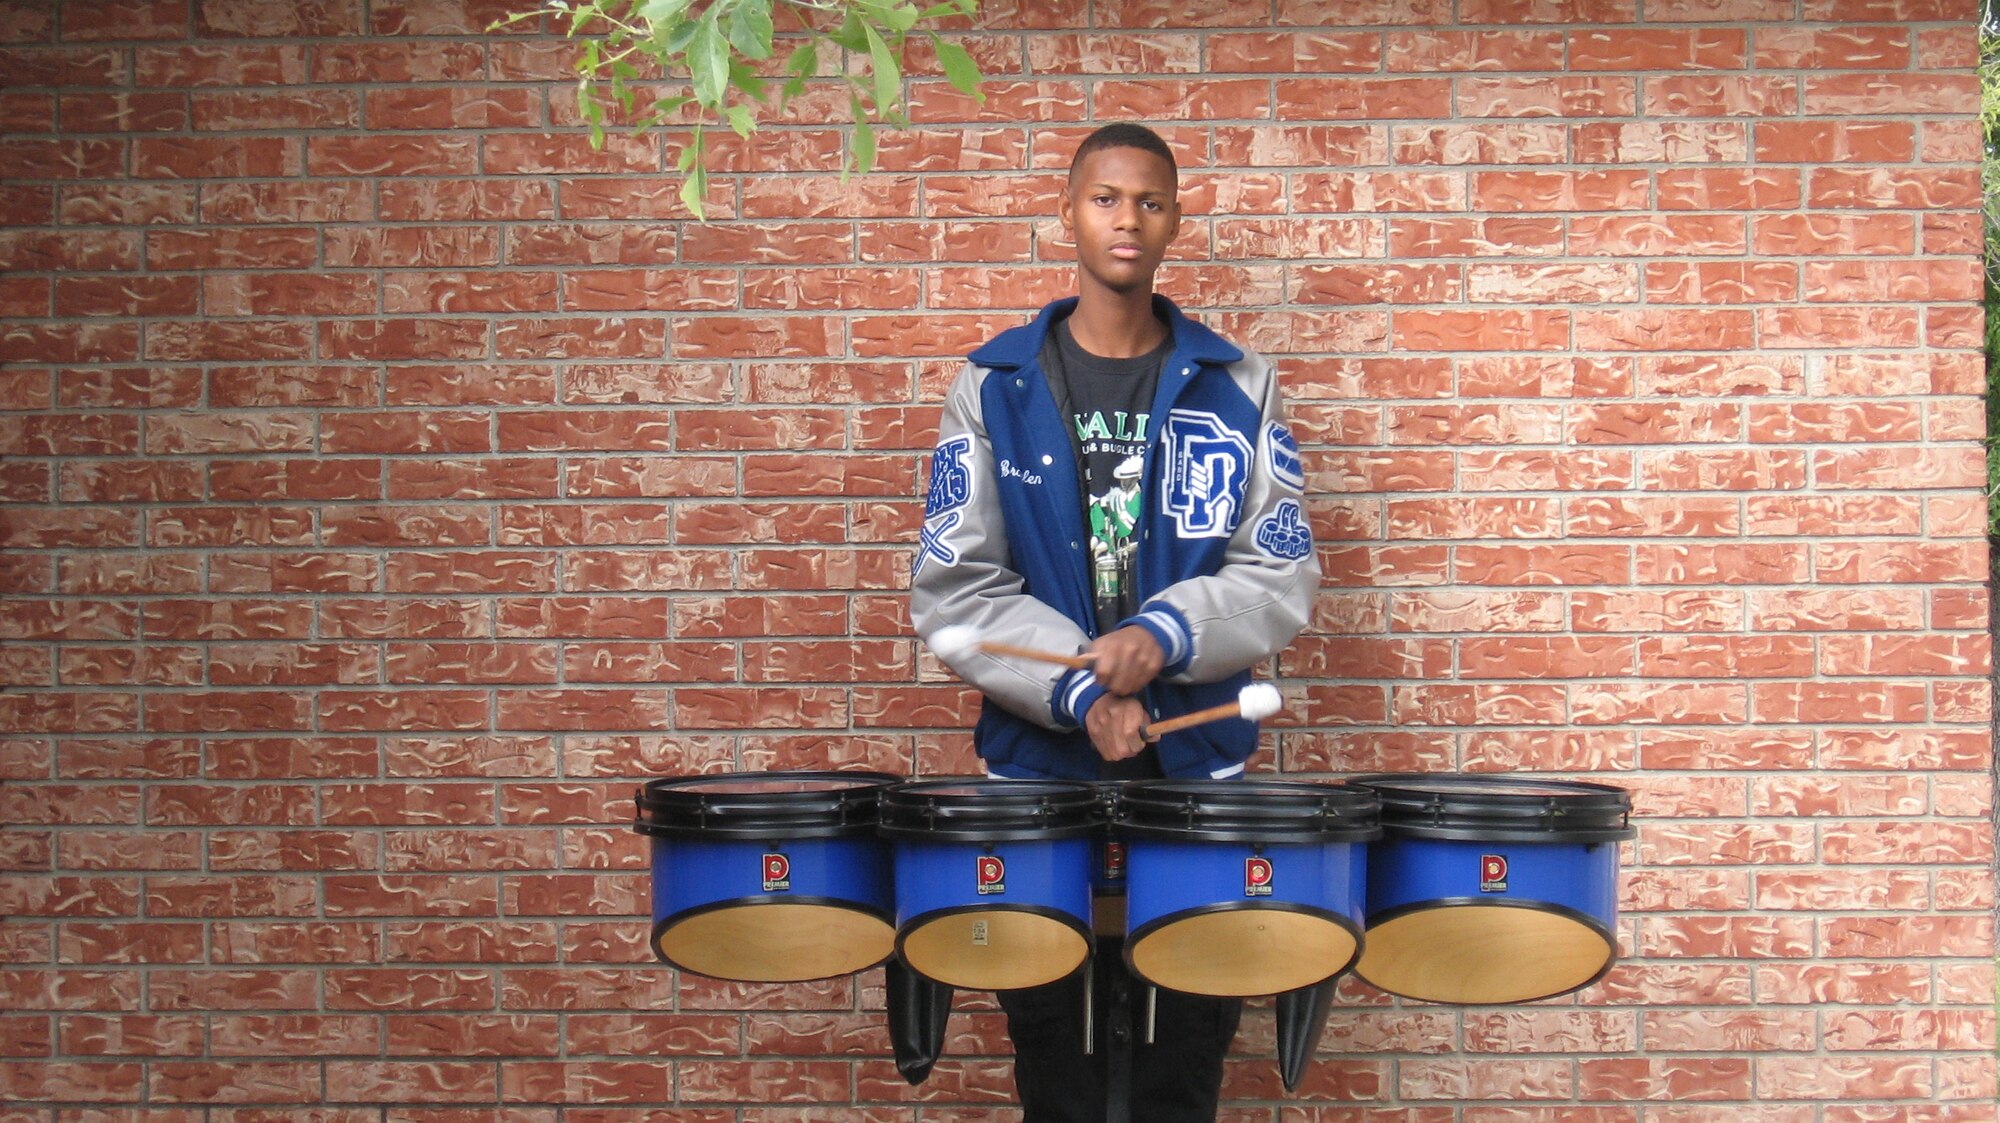 Pictured is Braylen Blassingame, with his snare drums.  Blassingame will be playing in the Macy’s Great American Marching Band on Nov. 27, 2014, in New York City, NY. Blassingame is a senior at Del Rio High School and section leader of the Mighty Ram Band. (Courtesy Photo)